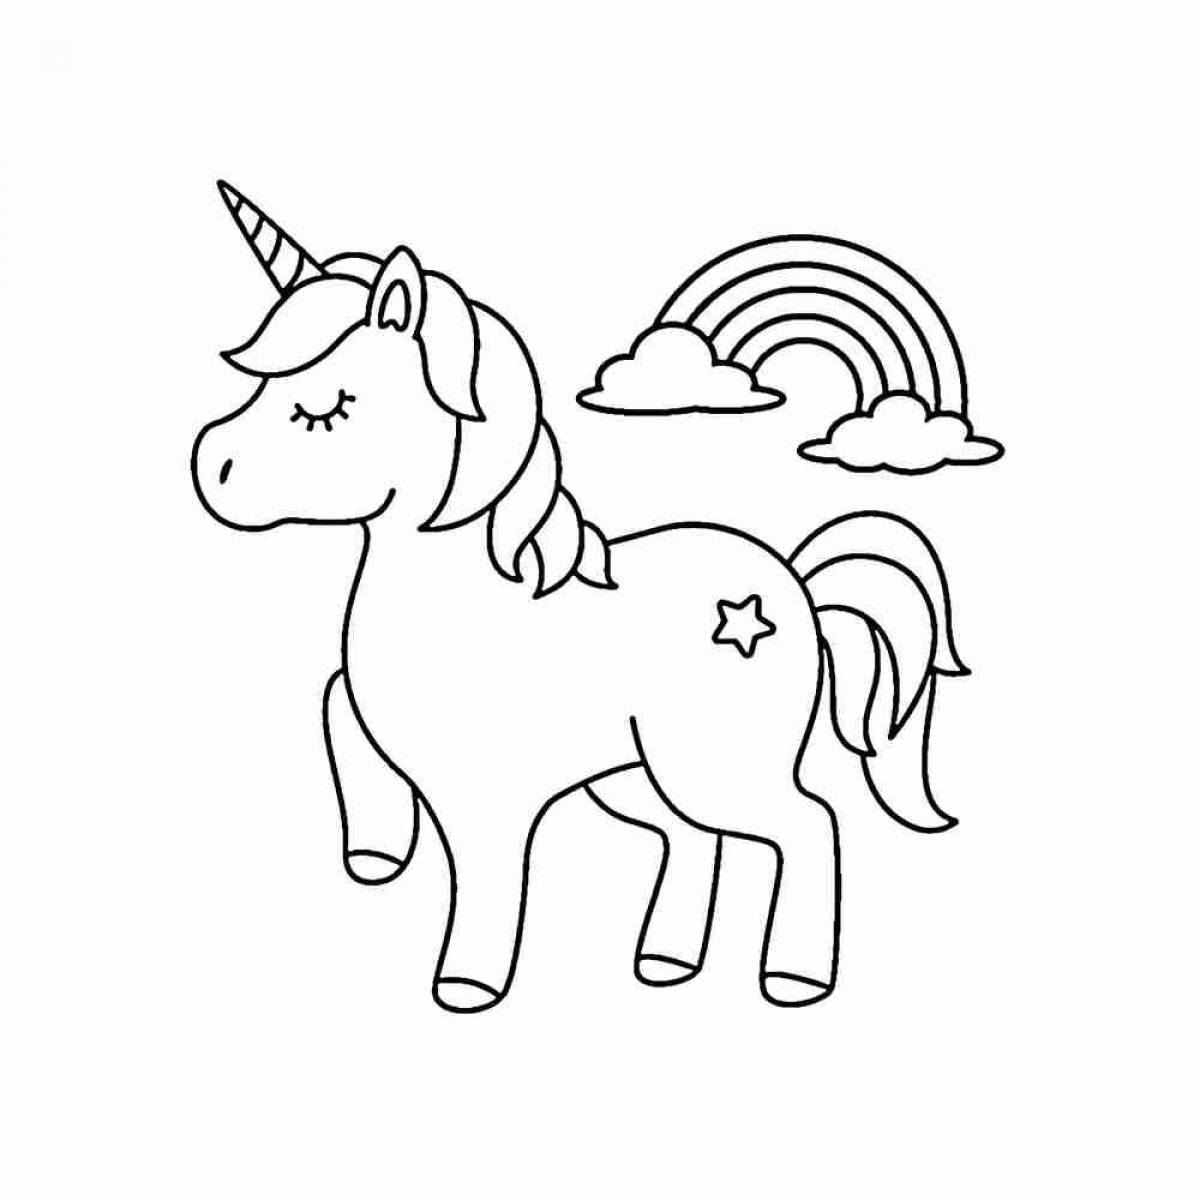 Playful unicorn coloring book for kids 4-5 years old